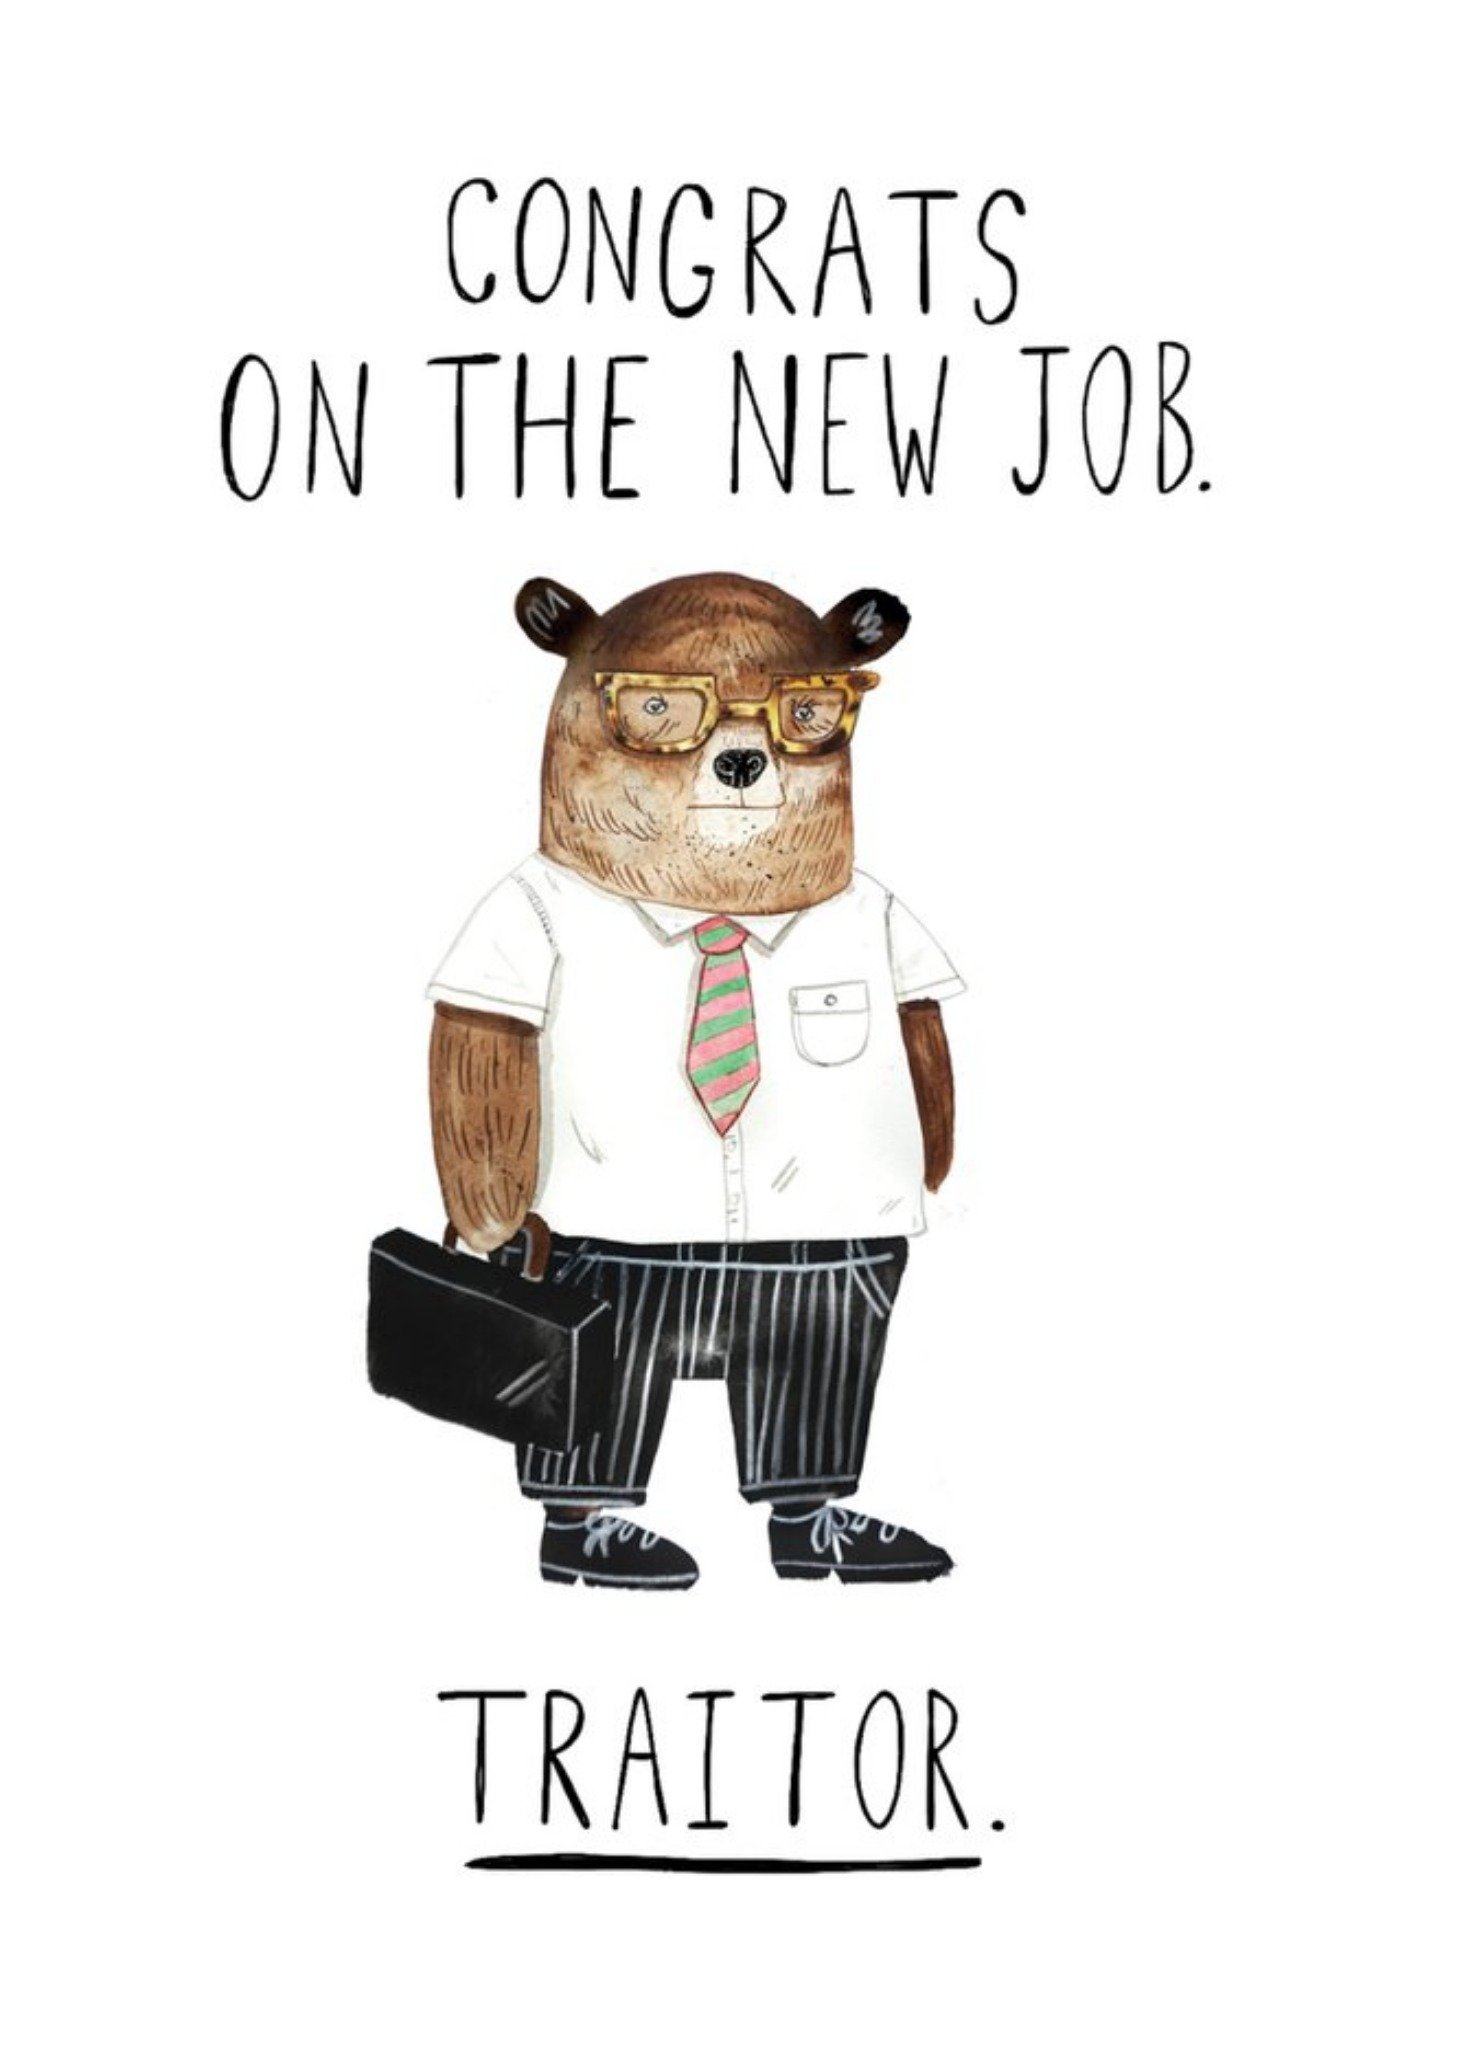 Jolly Awesome Congrats On The New Job Traitor Leaving Card Ecard